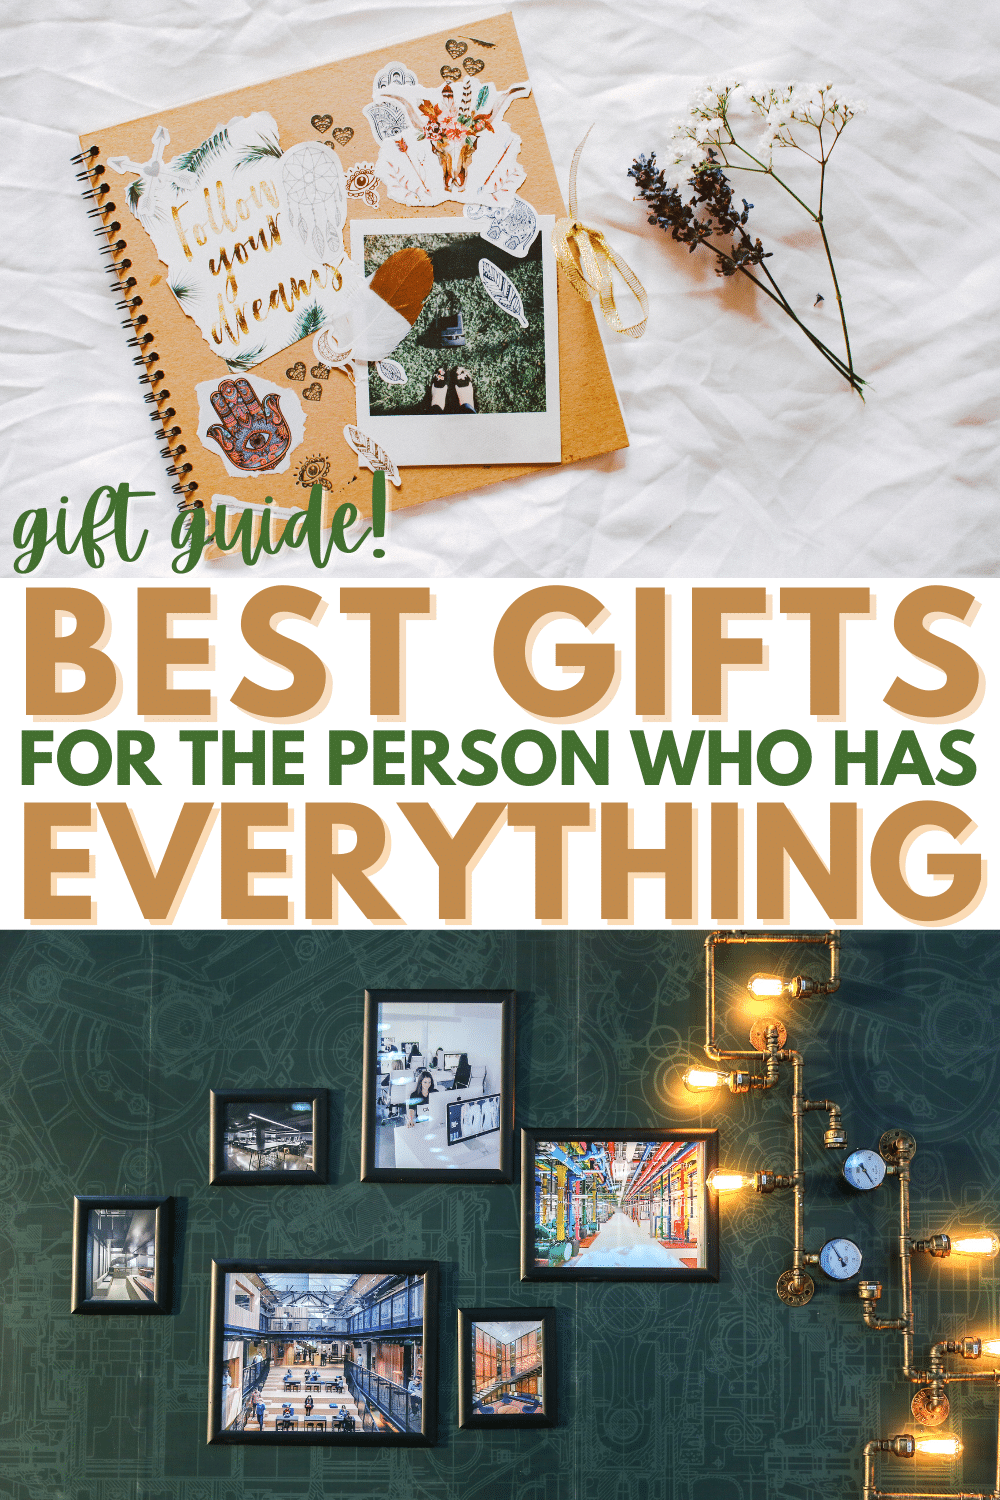 Do you have a hard time shopping for someone who doesn't have a wish list? Here's a guide of the best gifts for the person who has everything. #giftguide #giftideas #personalgifts via @wondermomwannab